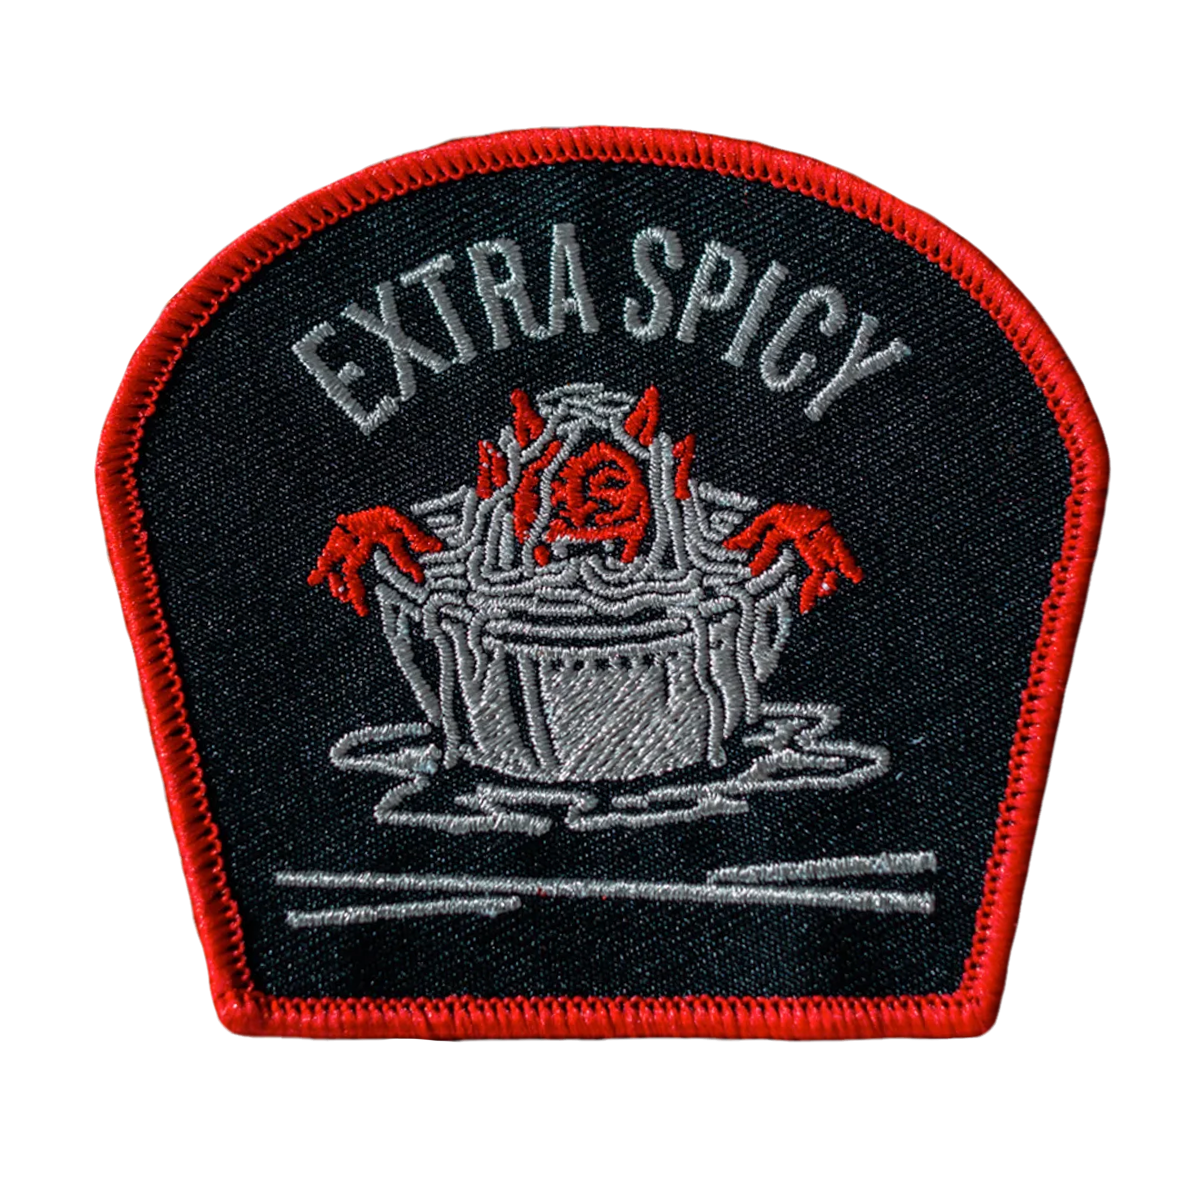 PYKNIC EXTRA SPICY PATCH